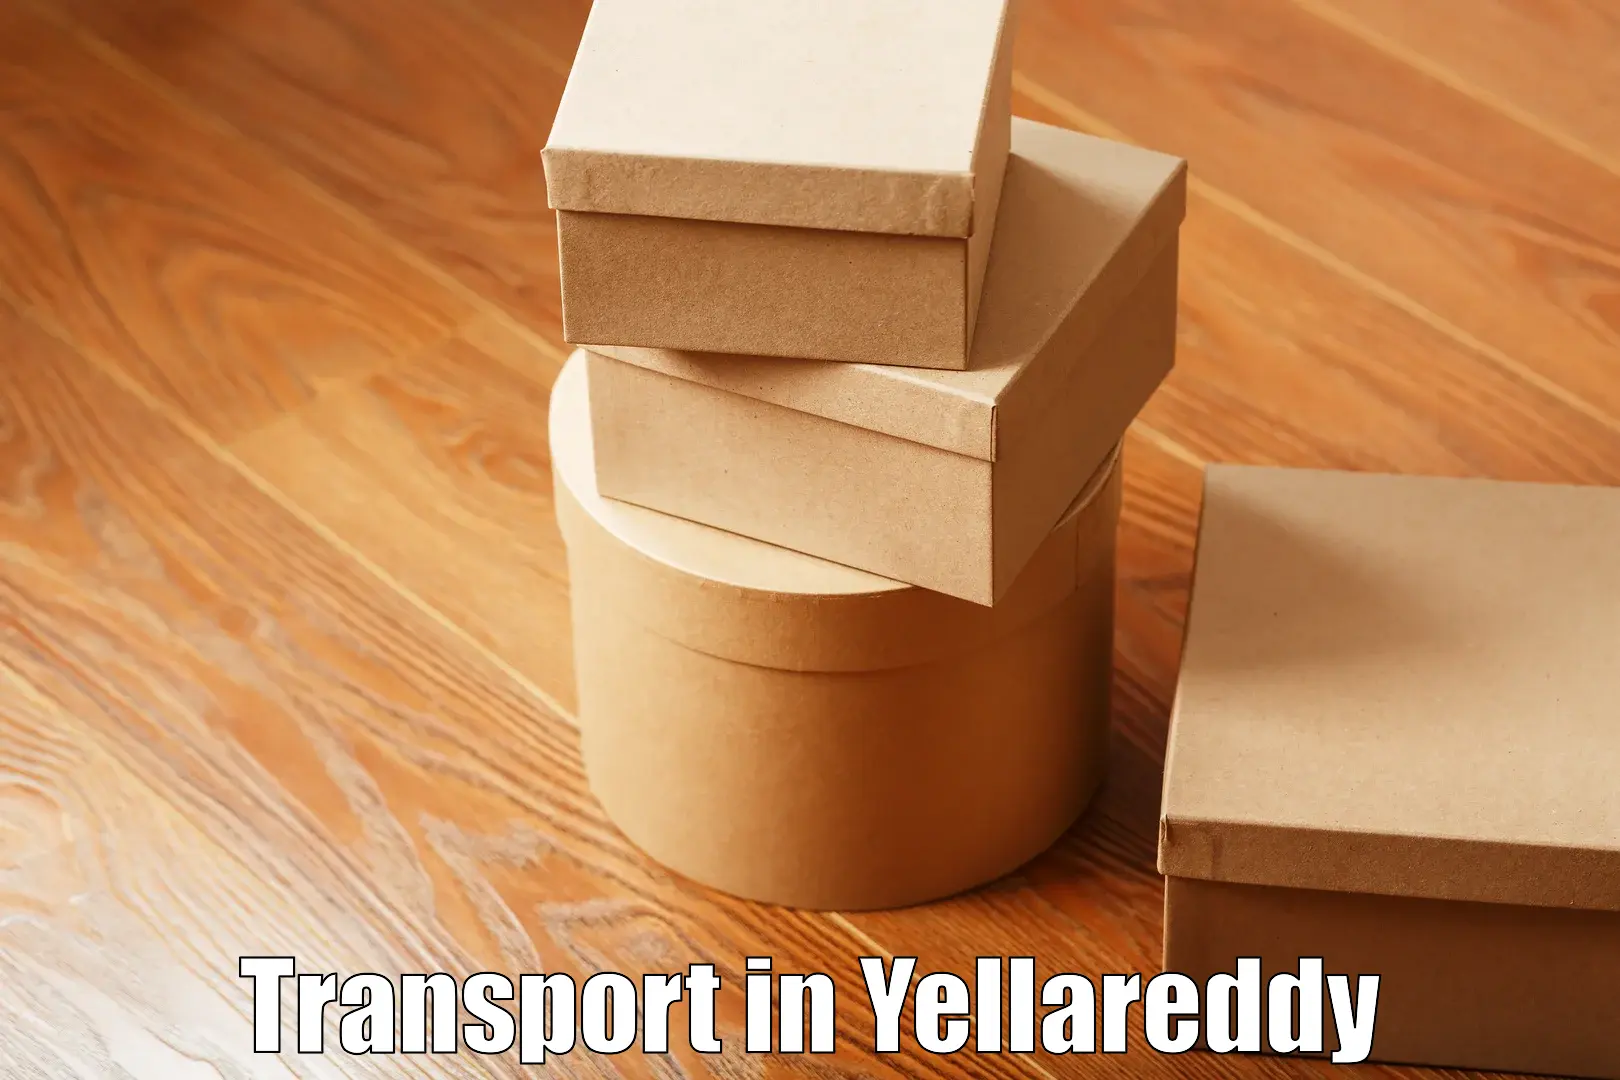 Vehicle transport services in Yellareddy